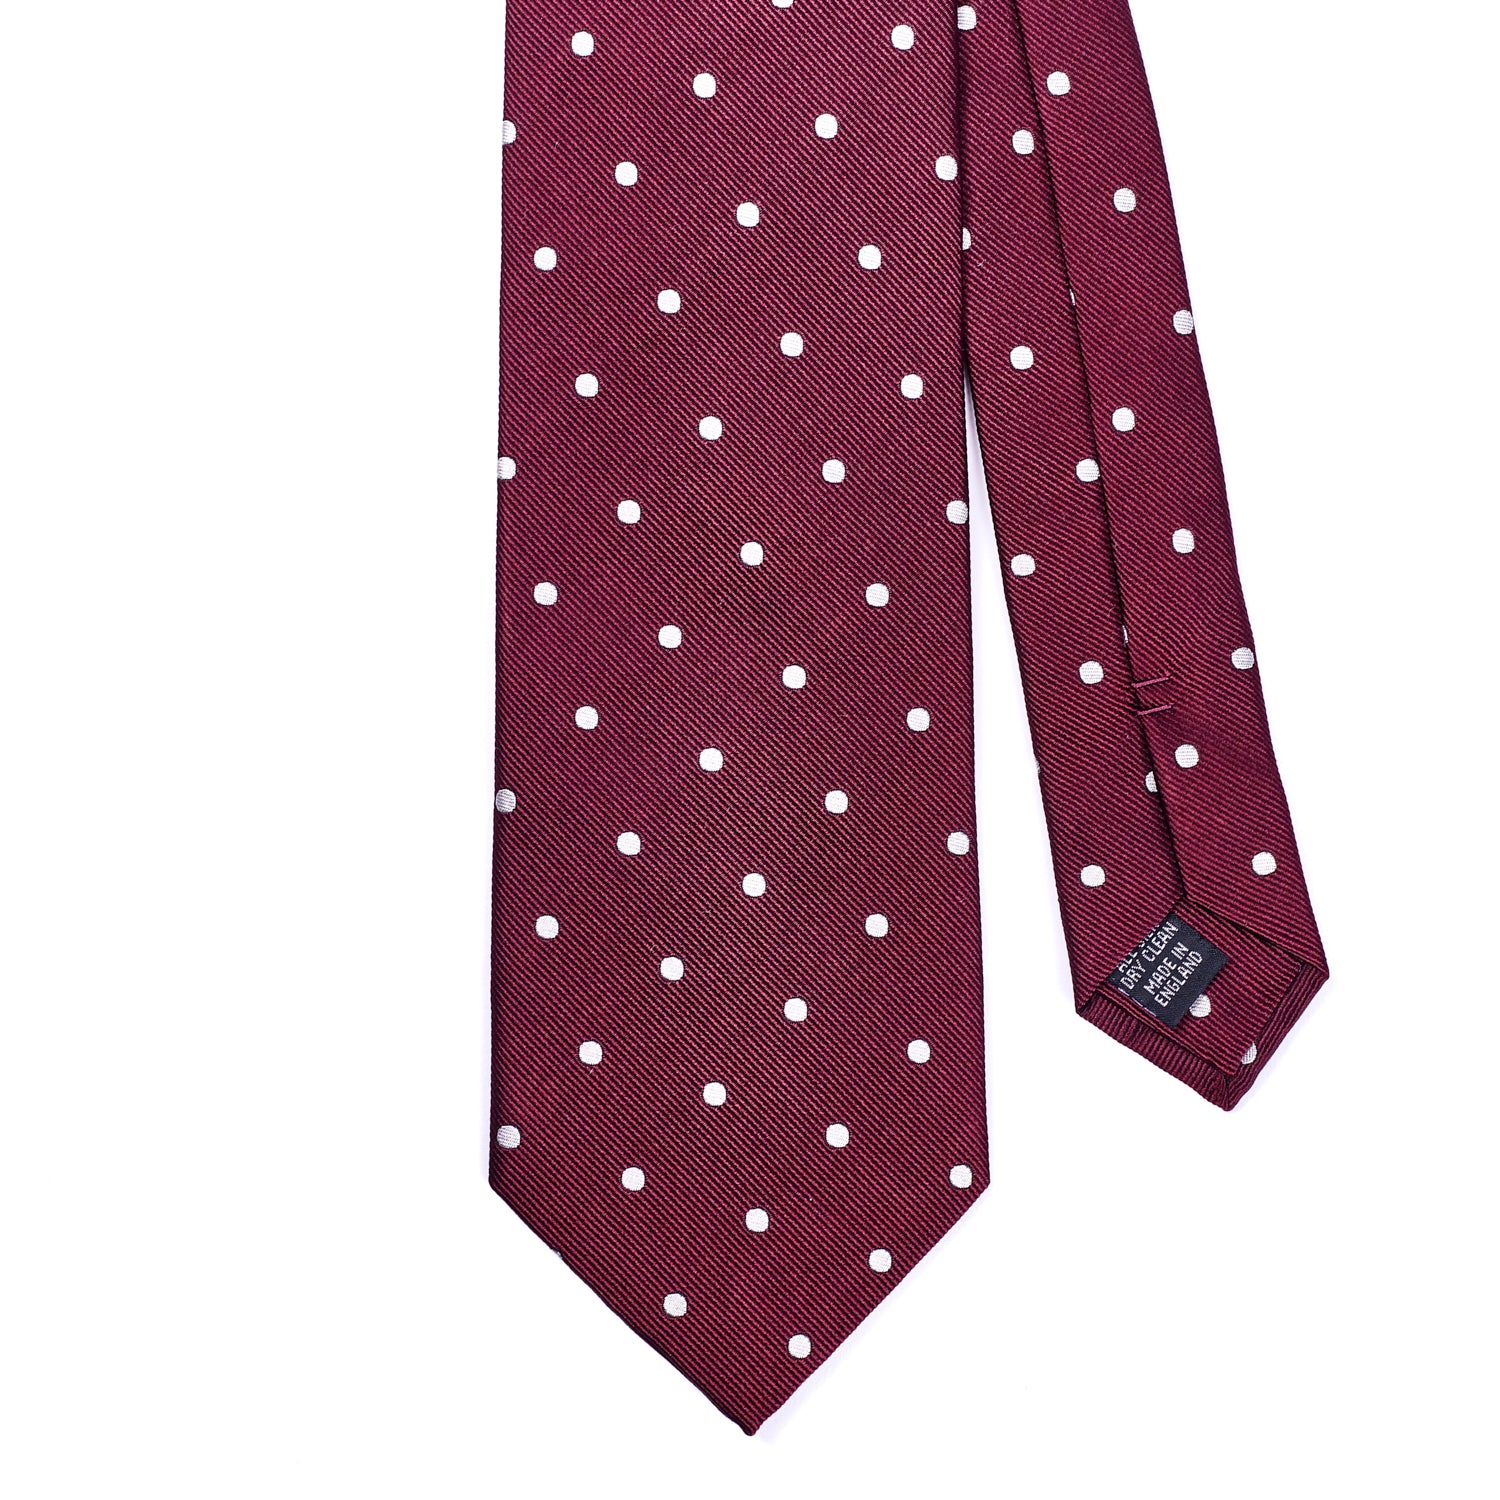 A Sovereign Grade Woven Oxblood Wide Dot Tie, 150 cm with quality craftsmanship from KirbyAllison.com.